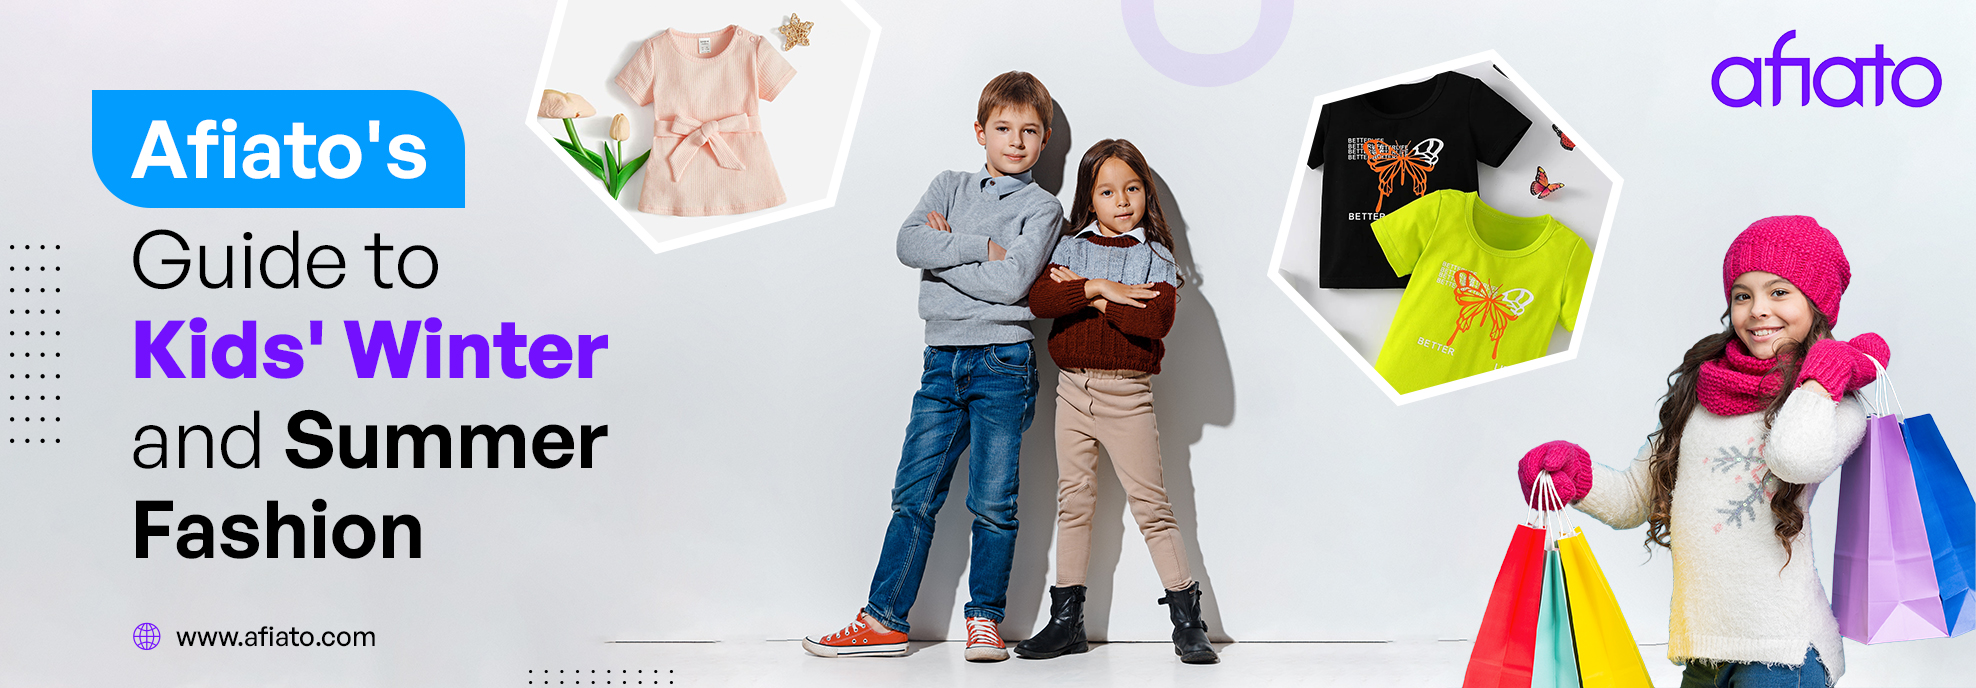 Afiato's Guide to Kids' Winter and Summer Fashion